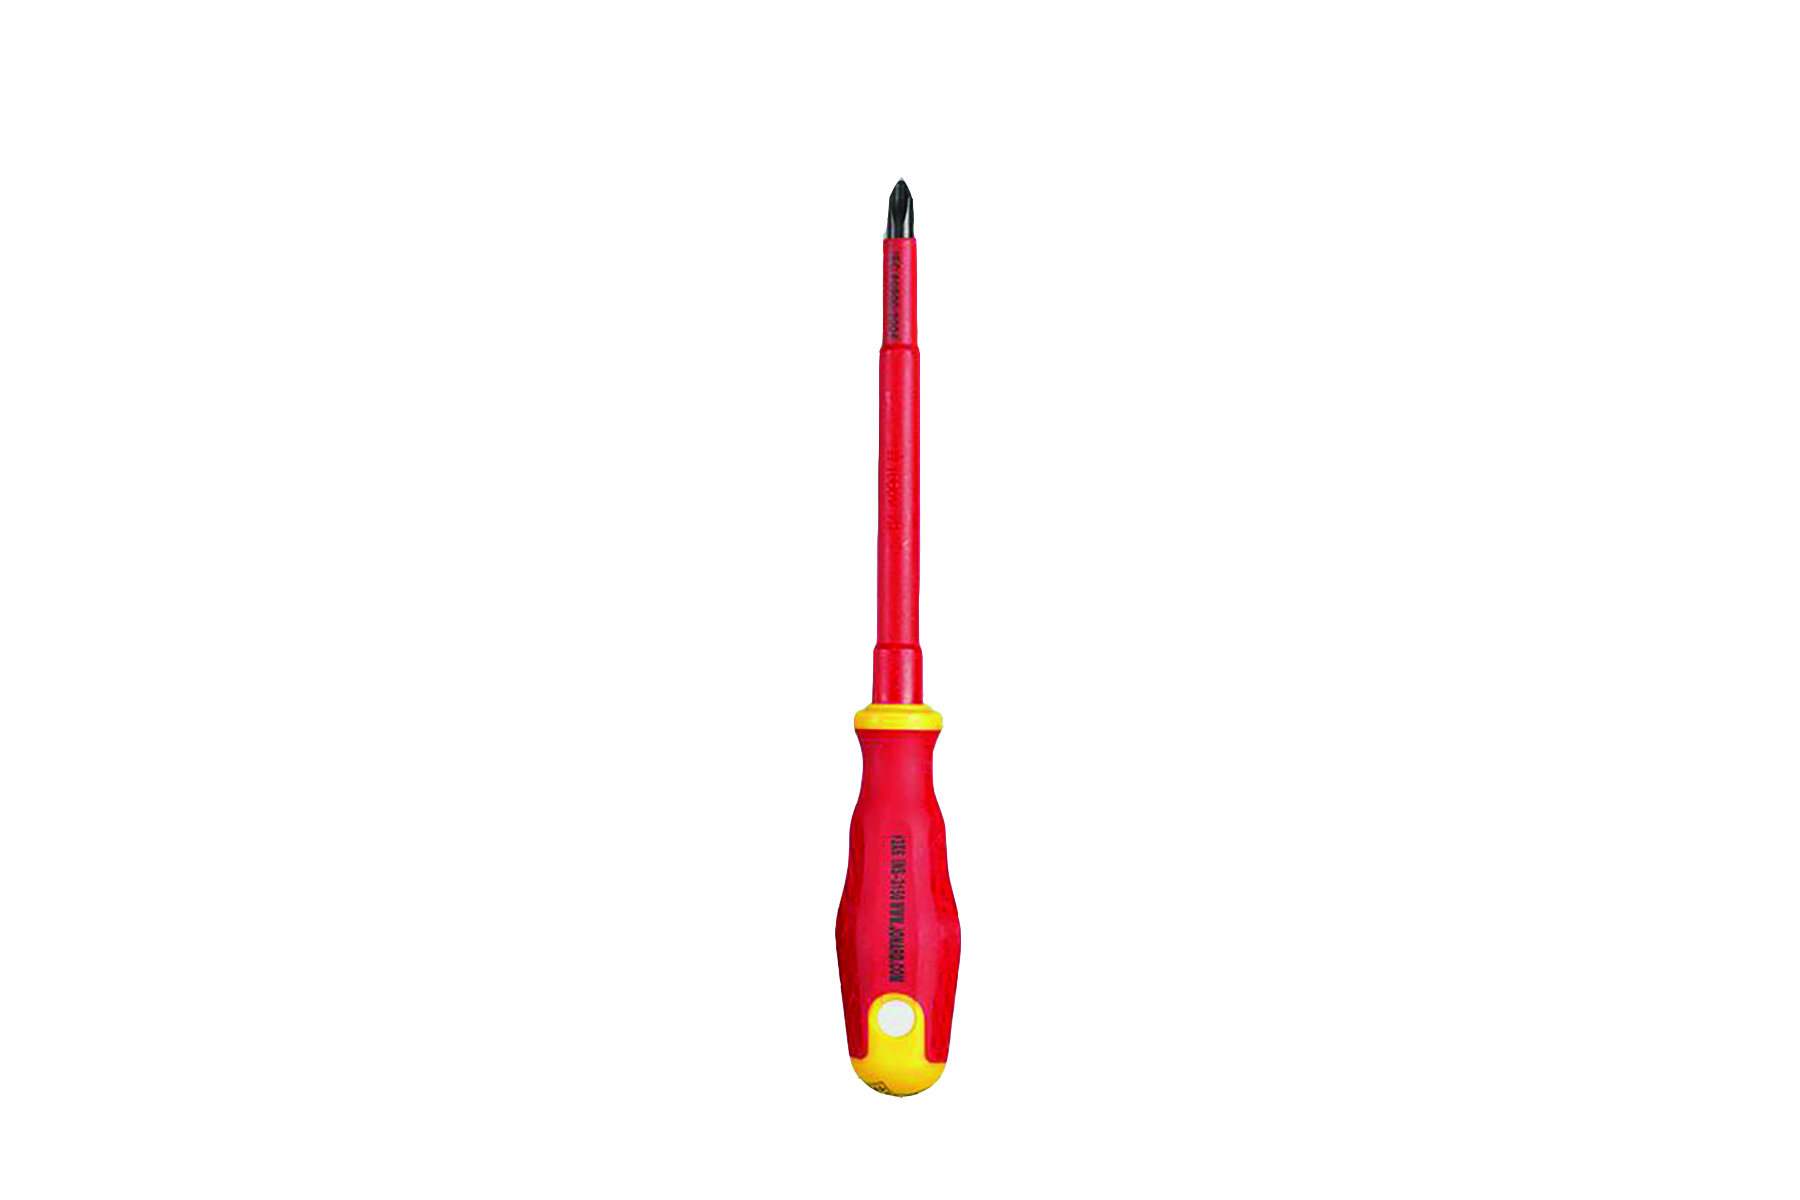 Red and yellow Phillips-head screwdriver. Image by Jonard Tools.